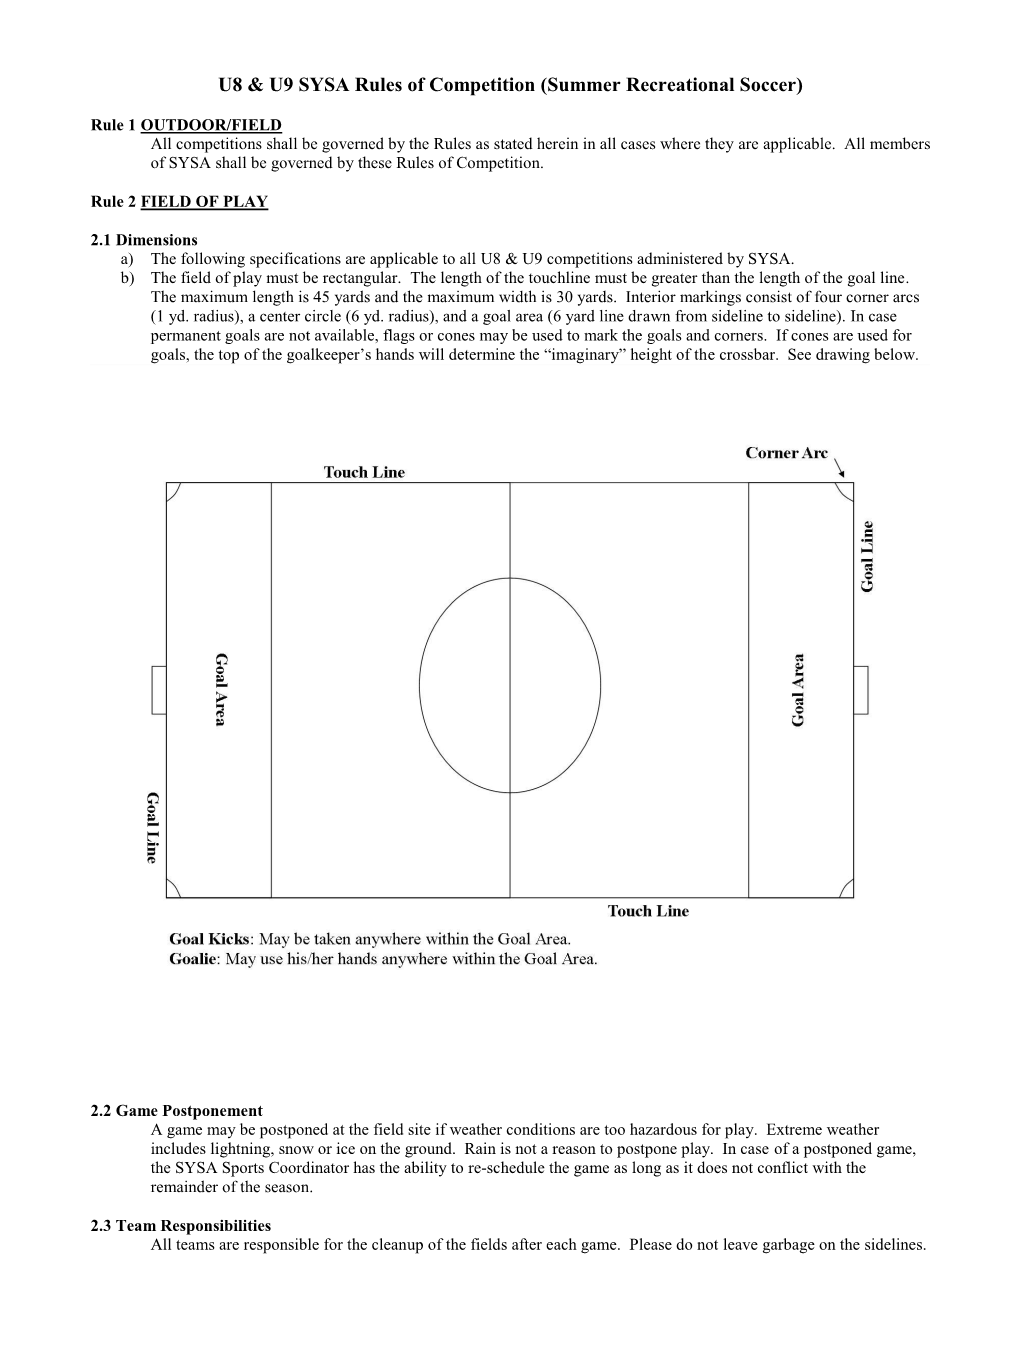 U9 Rules of Competition